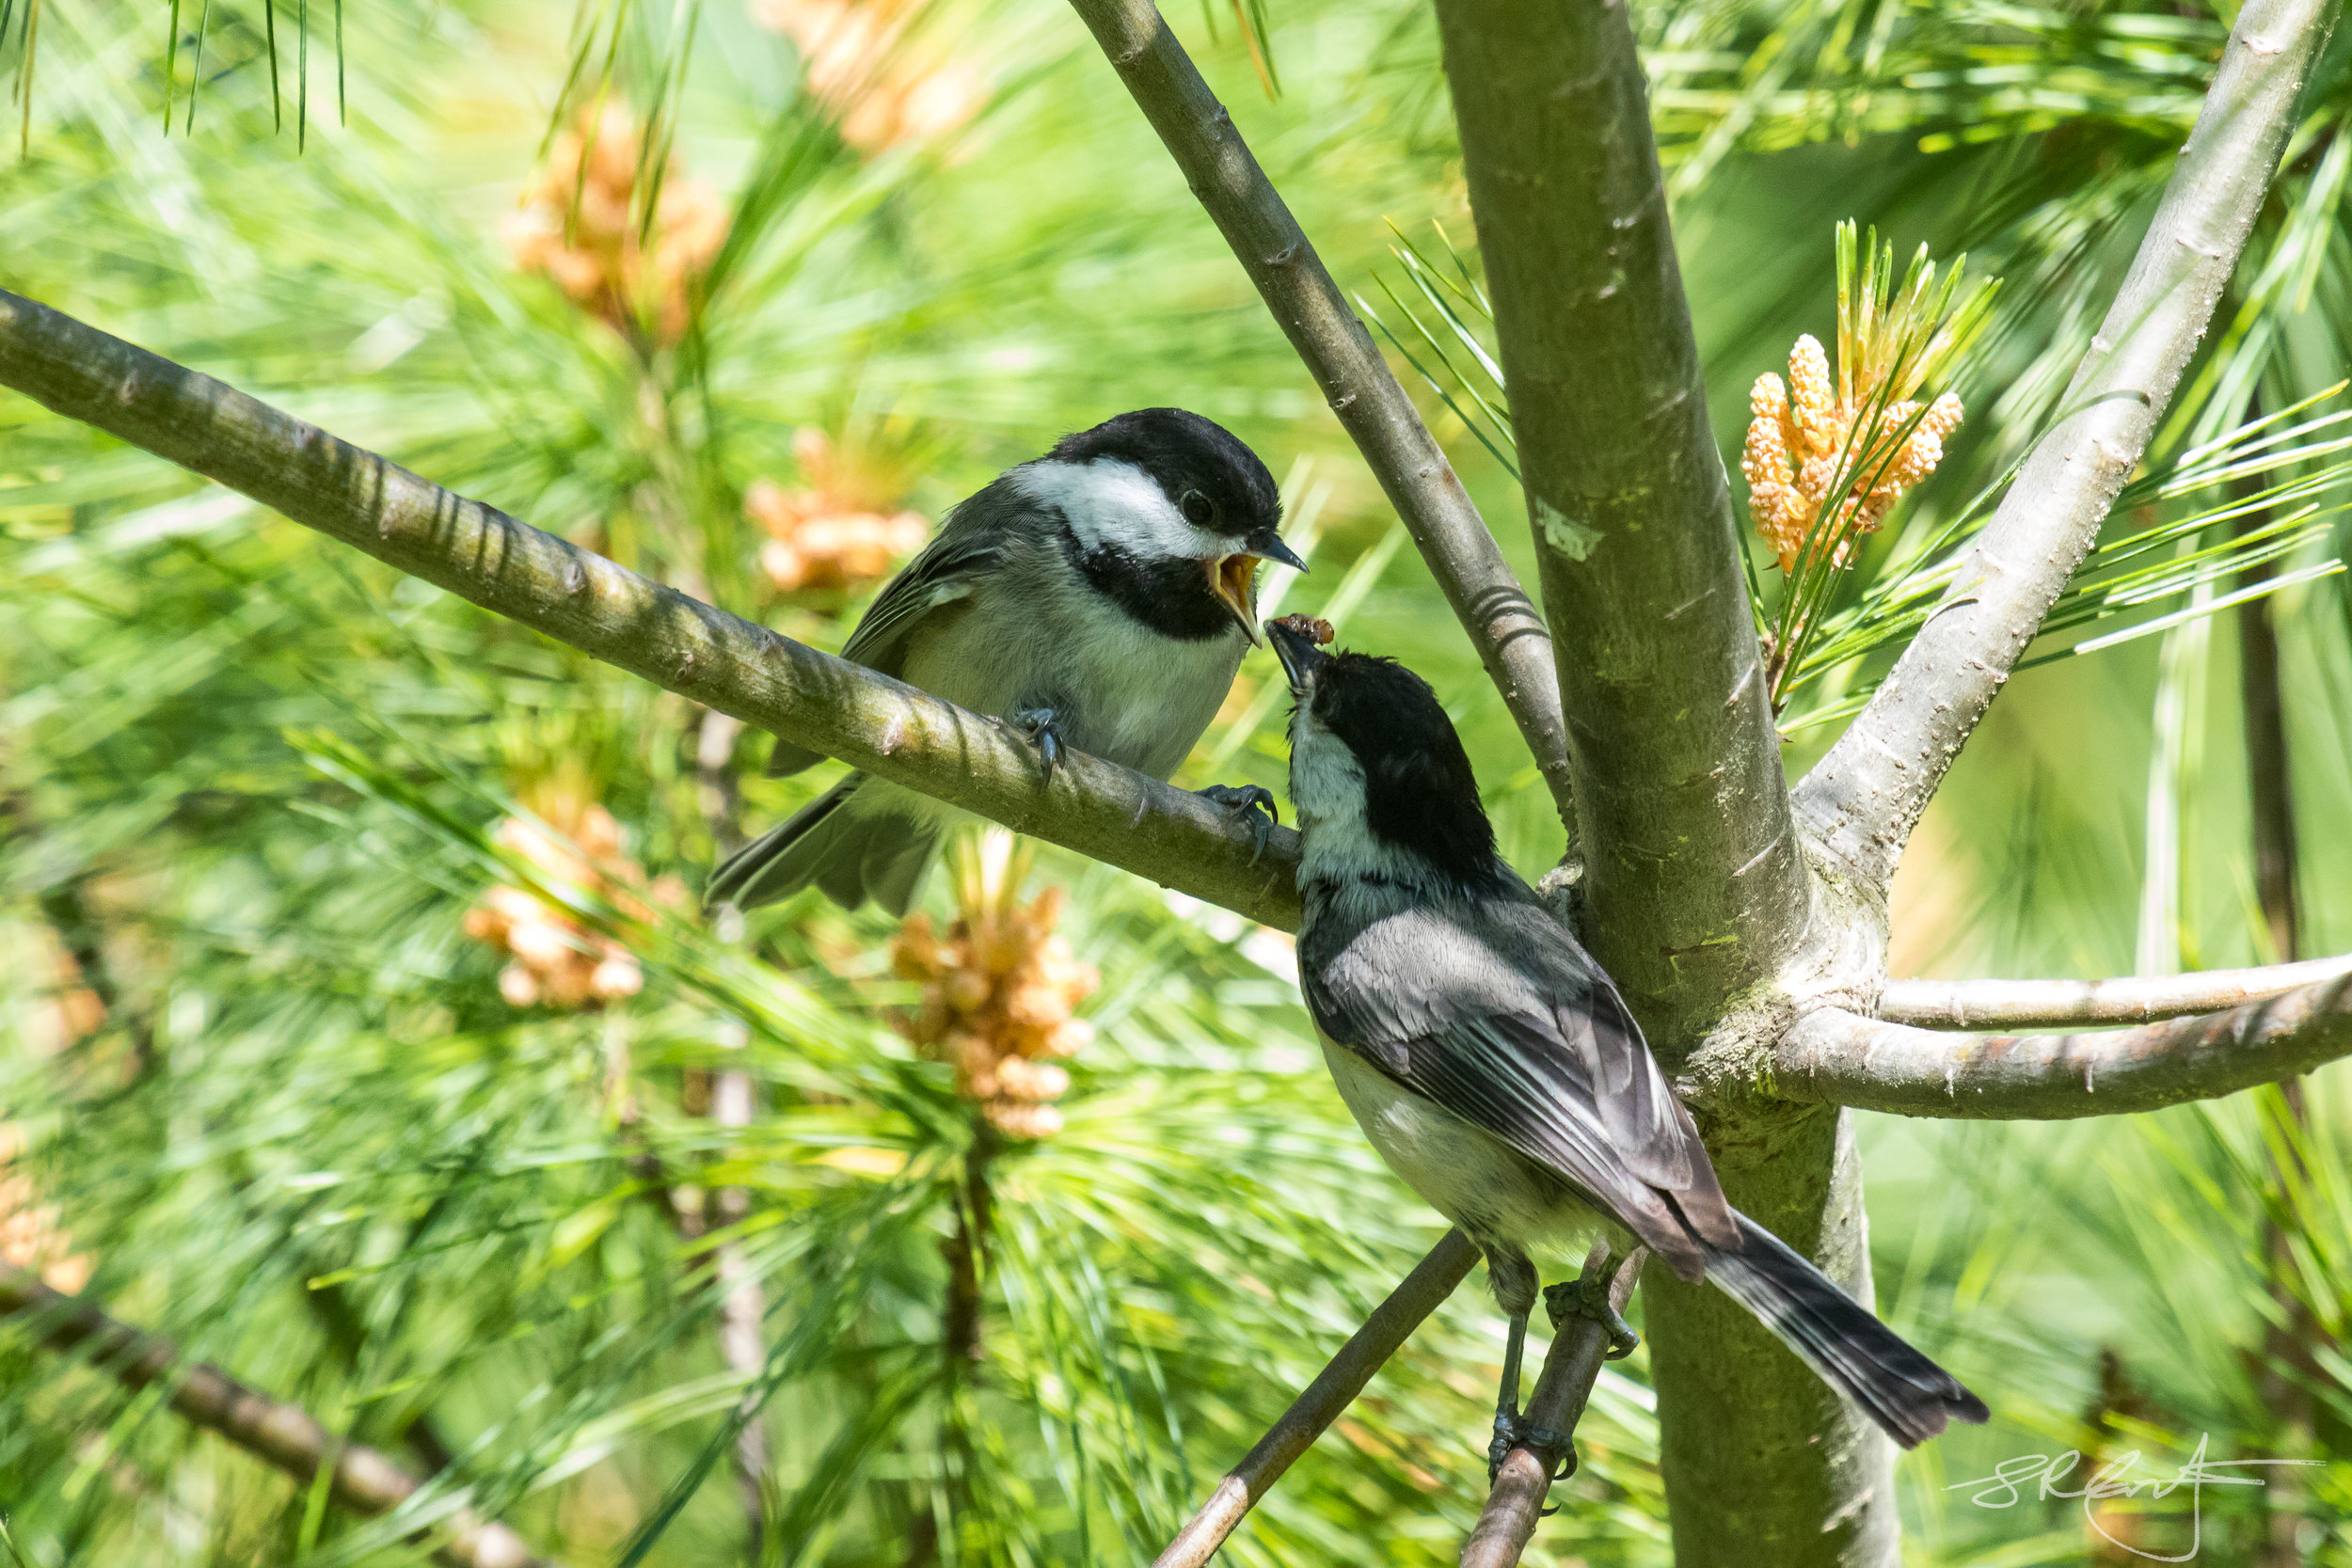 Two Black Capped Chick-a-dees